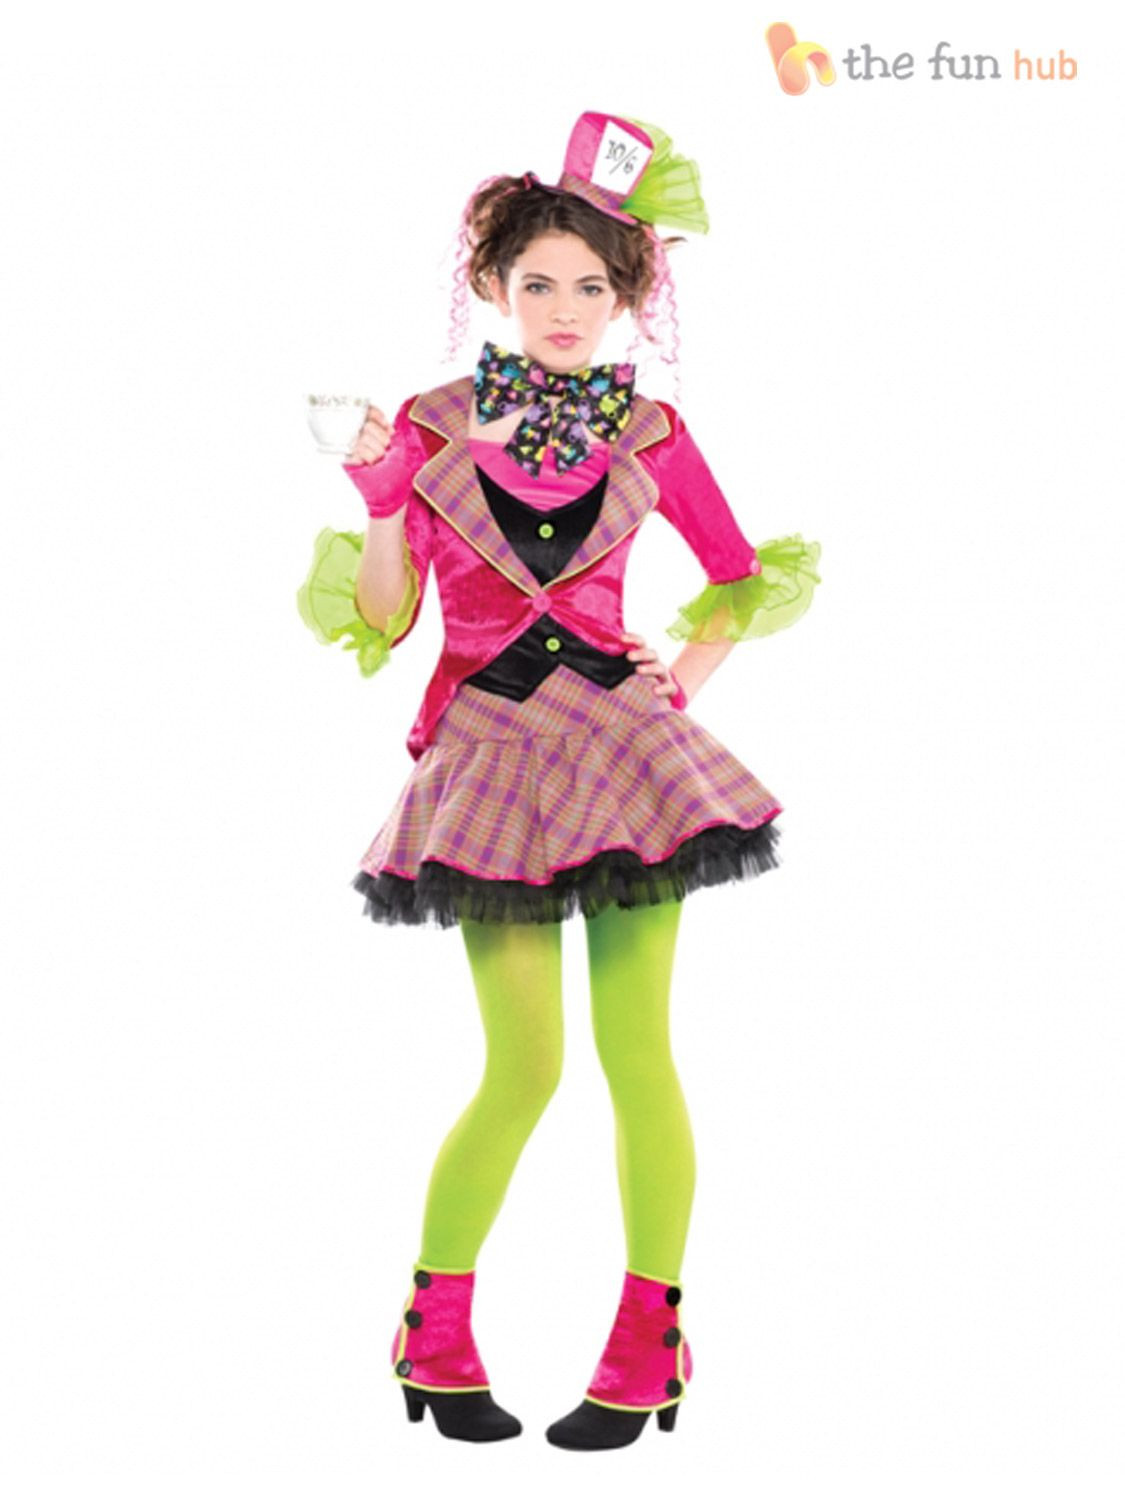 Mad Hatter Tea Party Costume Ideas
 Age 10 16 Girls Mad Hatter Costume Tea Party Teen Fancy